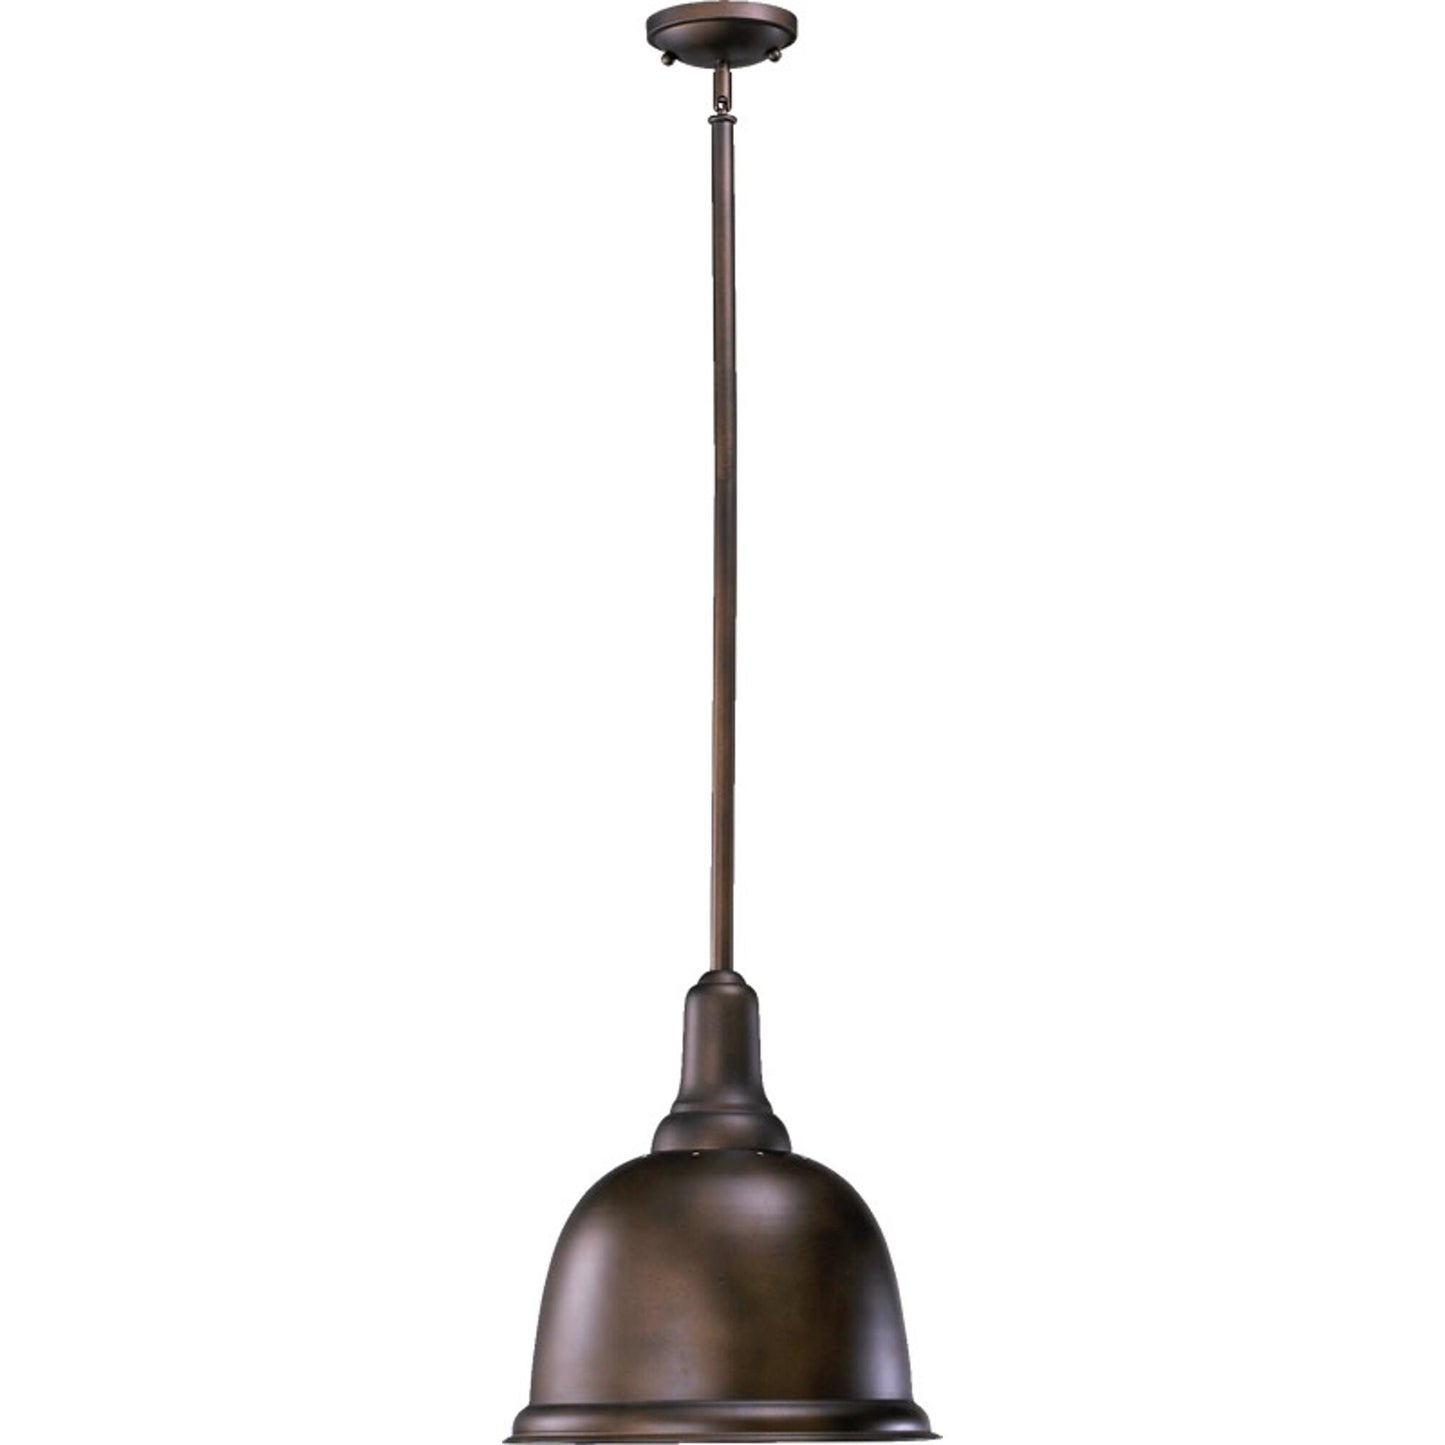 14w 1-Light Dome Pendant Oiled Bronze by Quorum. Traditional Design Perfect for updating a kitchen island, over a bar, or adding a fresh look to a bathroom